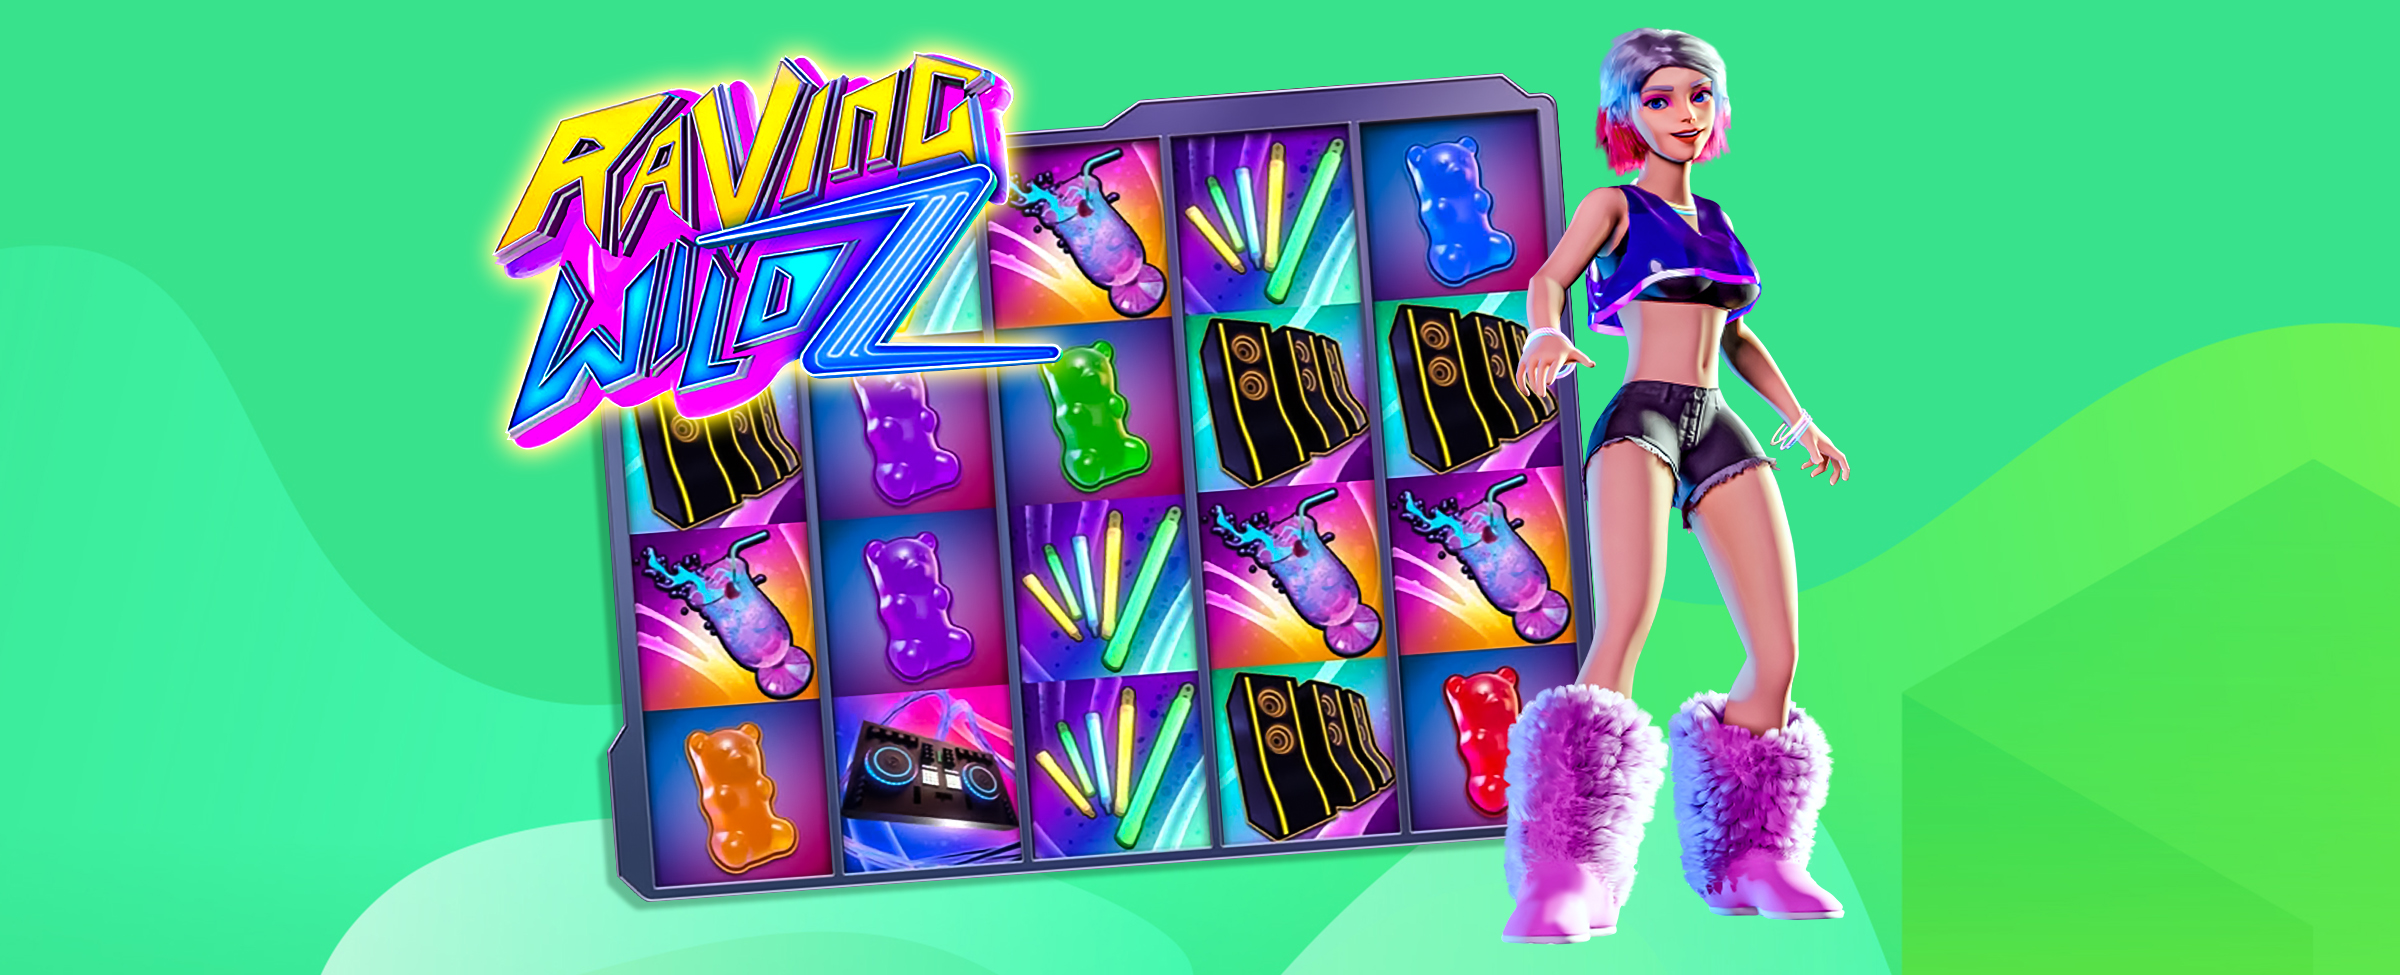 A neon-colored screenshot of the Raving Wildz slot game at SlotsLV showing the various features a player might see, with a young girl dressed in rave wear standing in front